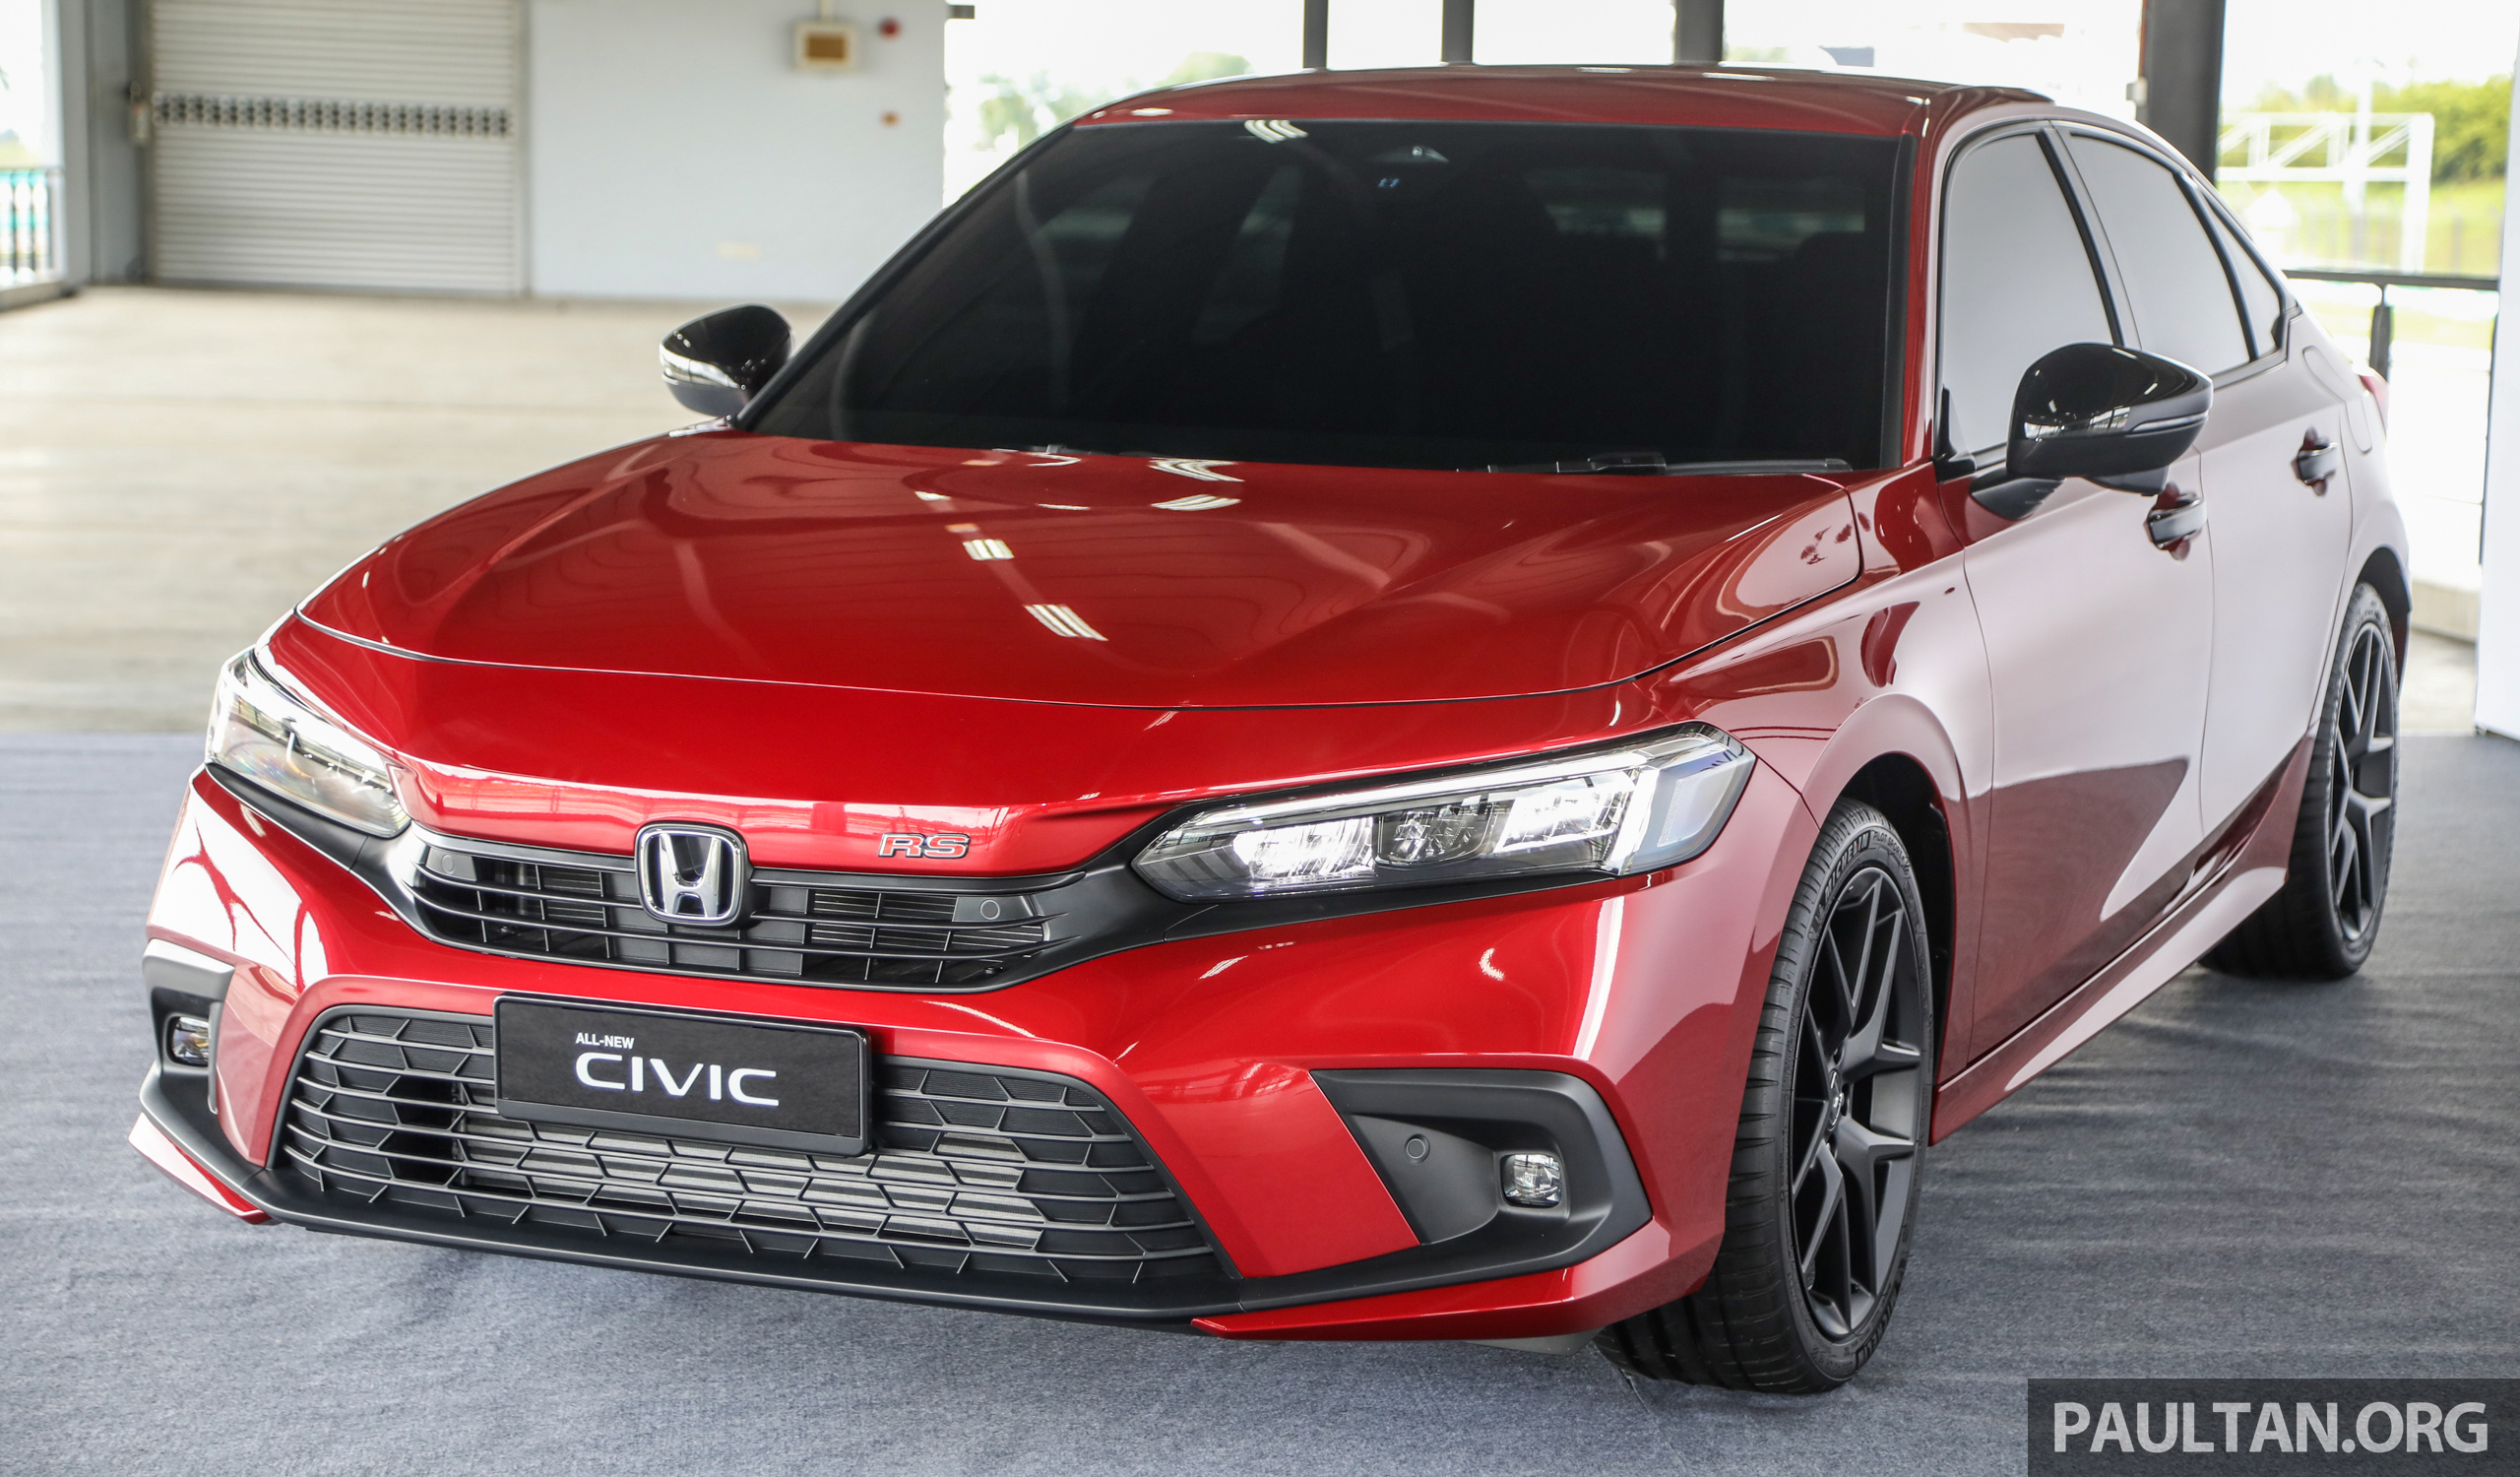 22 Honda Civic Previewed In Malaysia 11th Gen Fe With 1 Ps Open For Booking Launching In Q1 22 Paultan Org